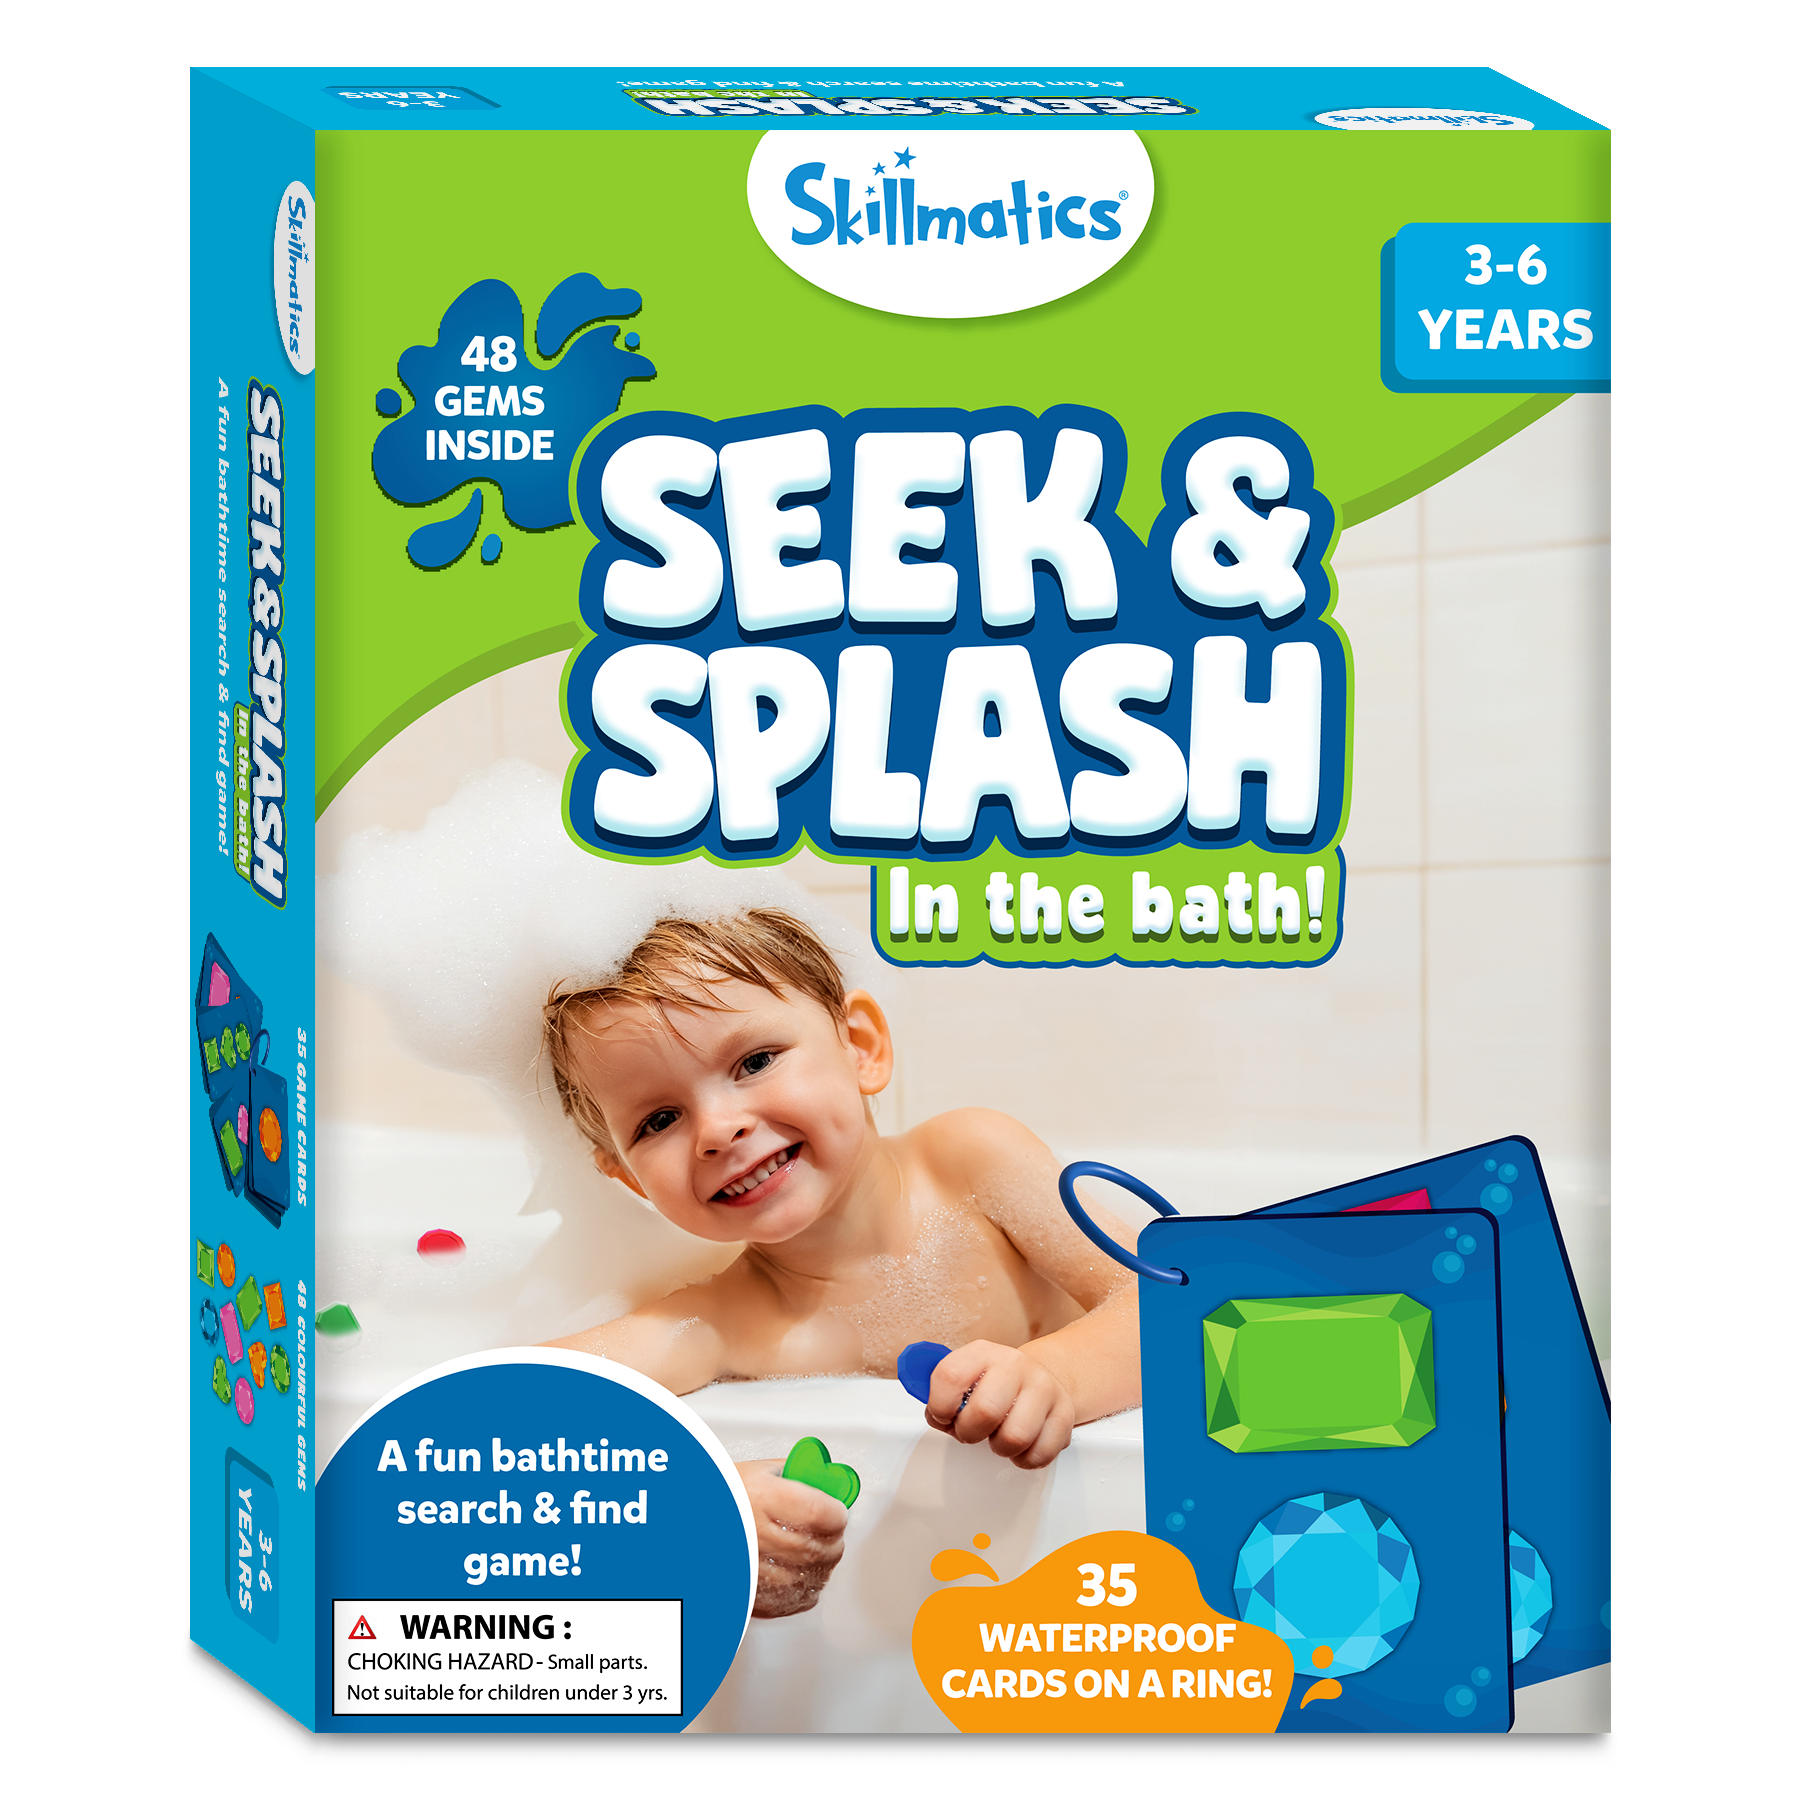 Skillmatics Seek & Splash Bath Toys - Search and Find Gem Game, Bathtub, Baby Pool & Summer Toys for Toddlers, Kids, Preschoolers, Gifts for Boys & Girls Ages 3, 4, 5, 6